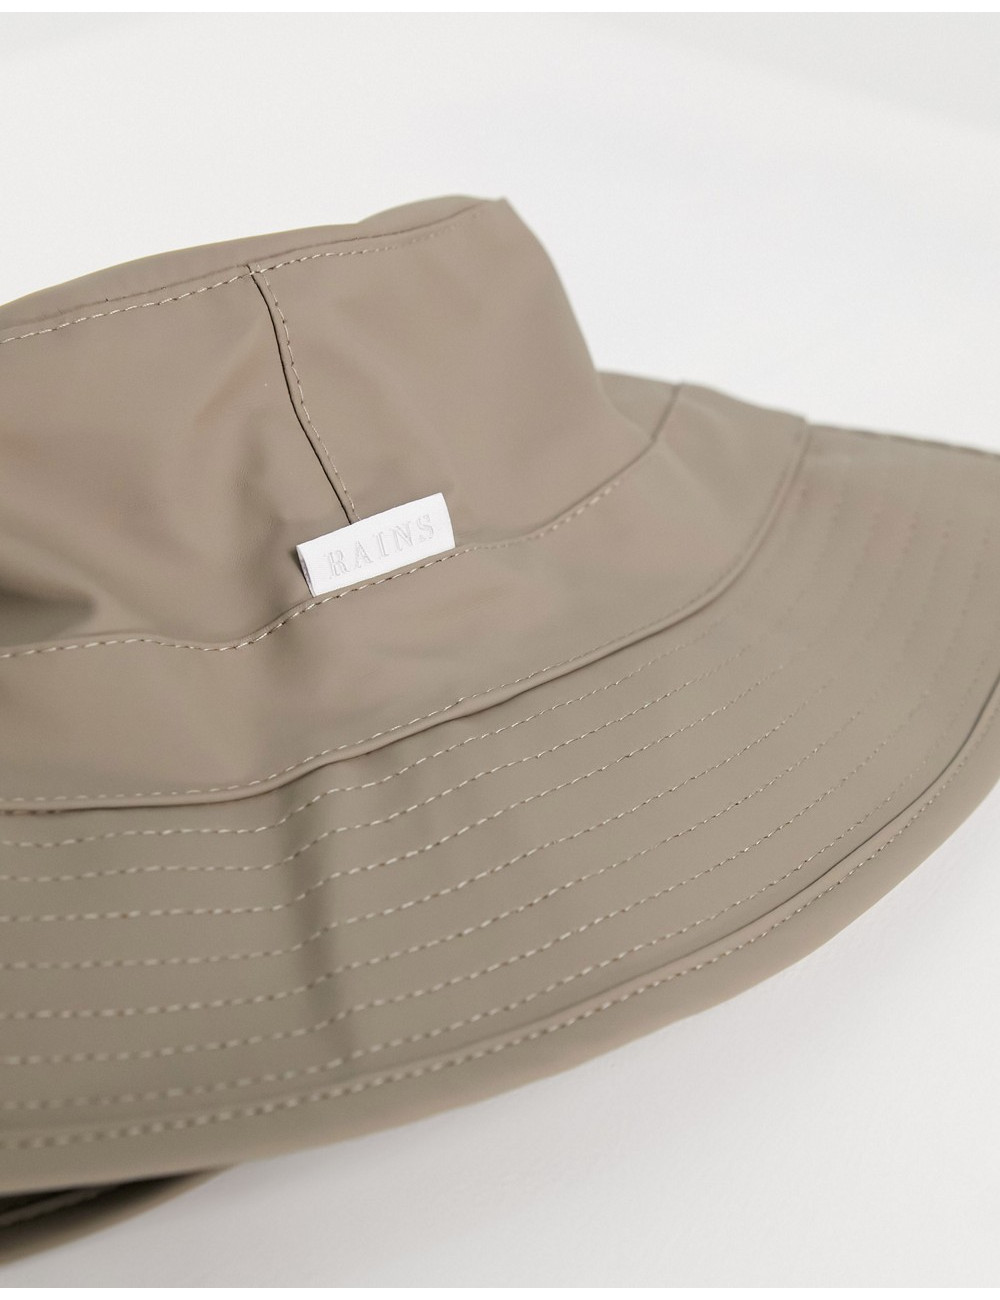 Rains 2001 bucket hat in taupe